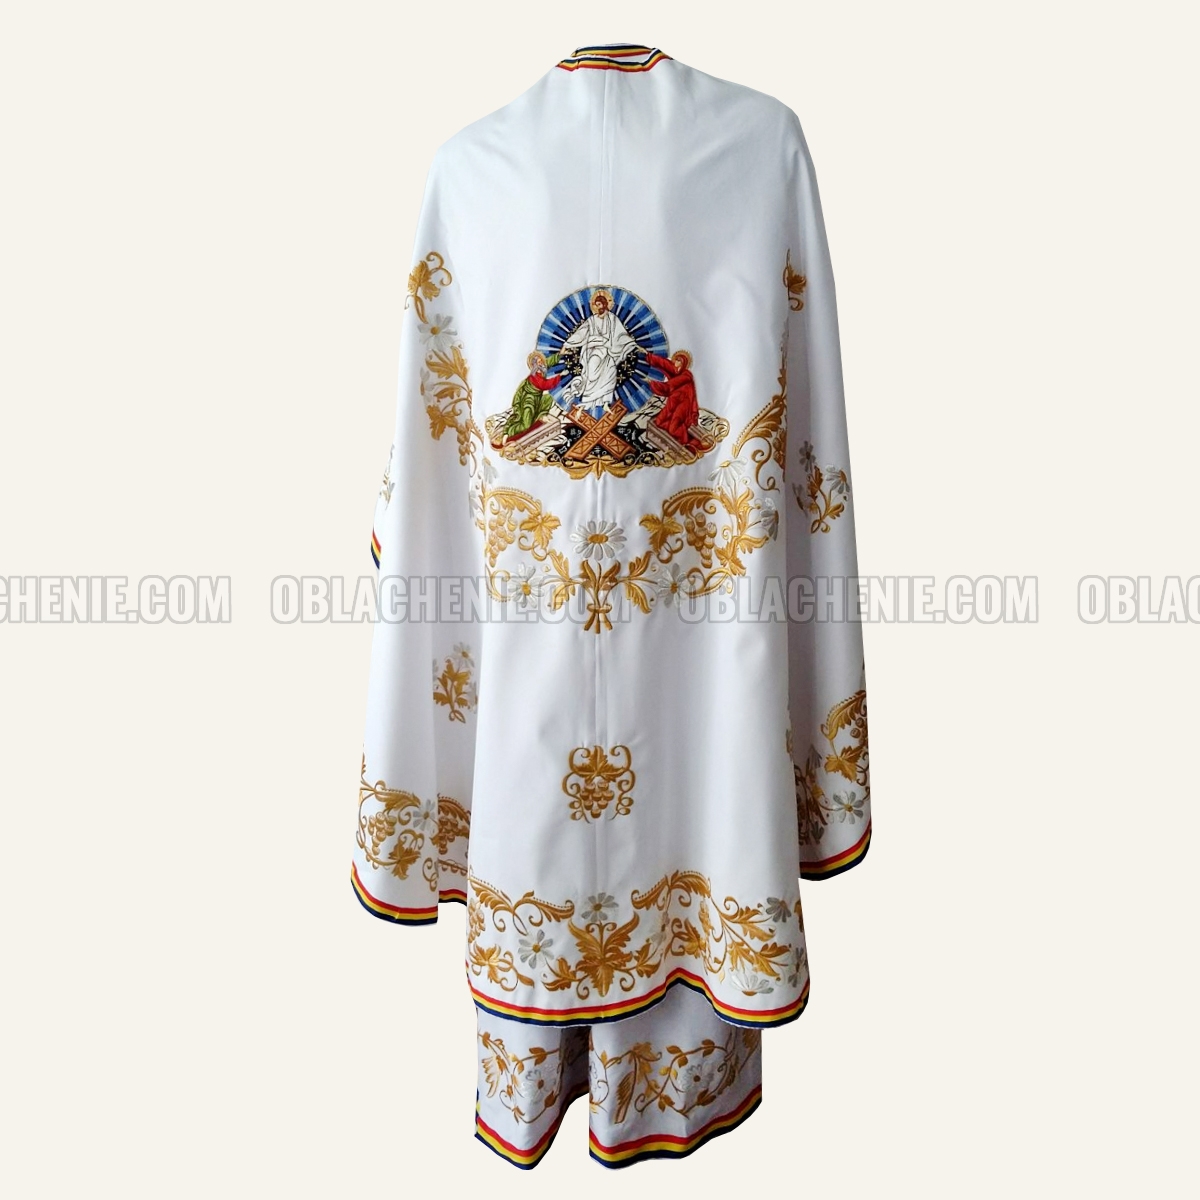 Embroidered priest's vestments 10244